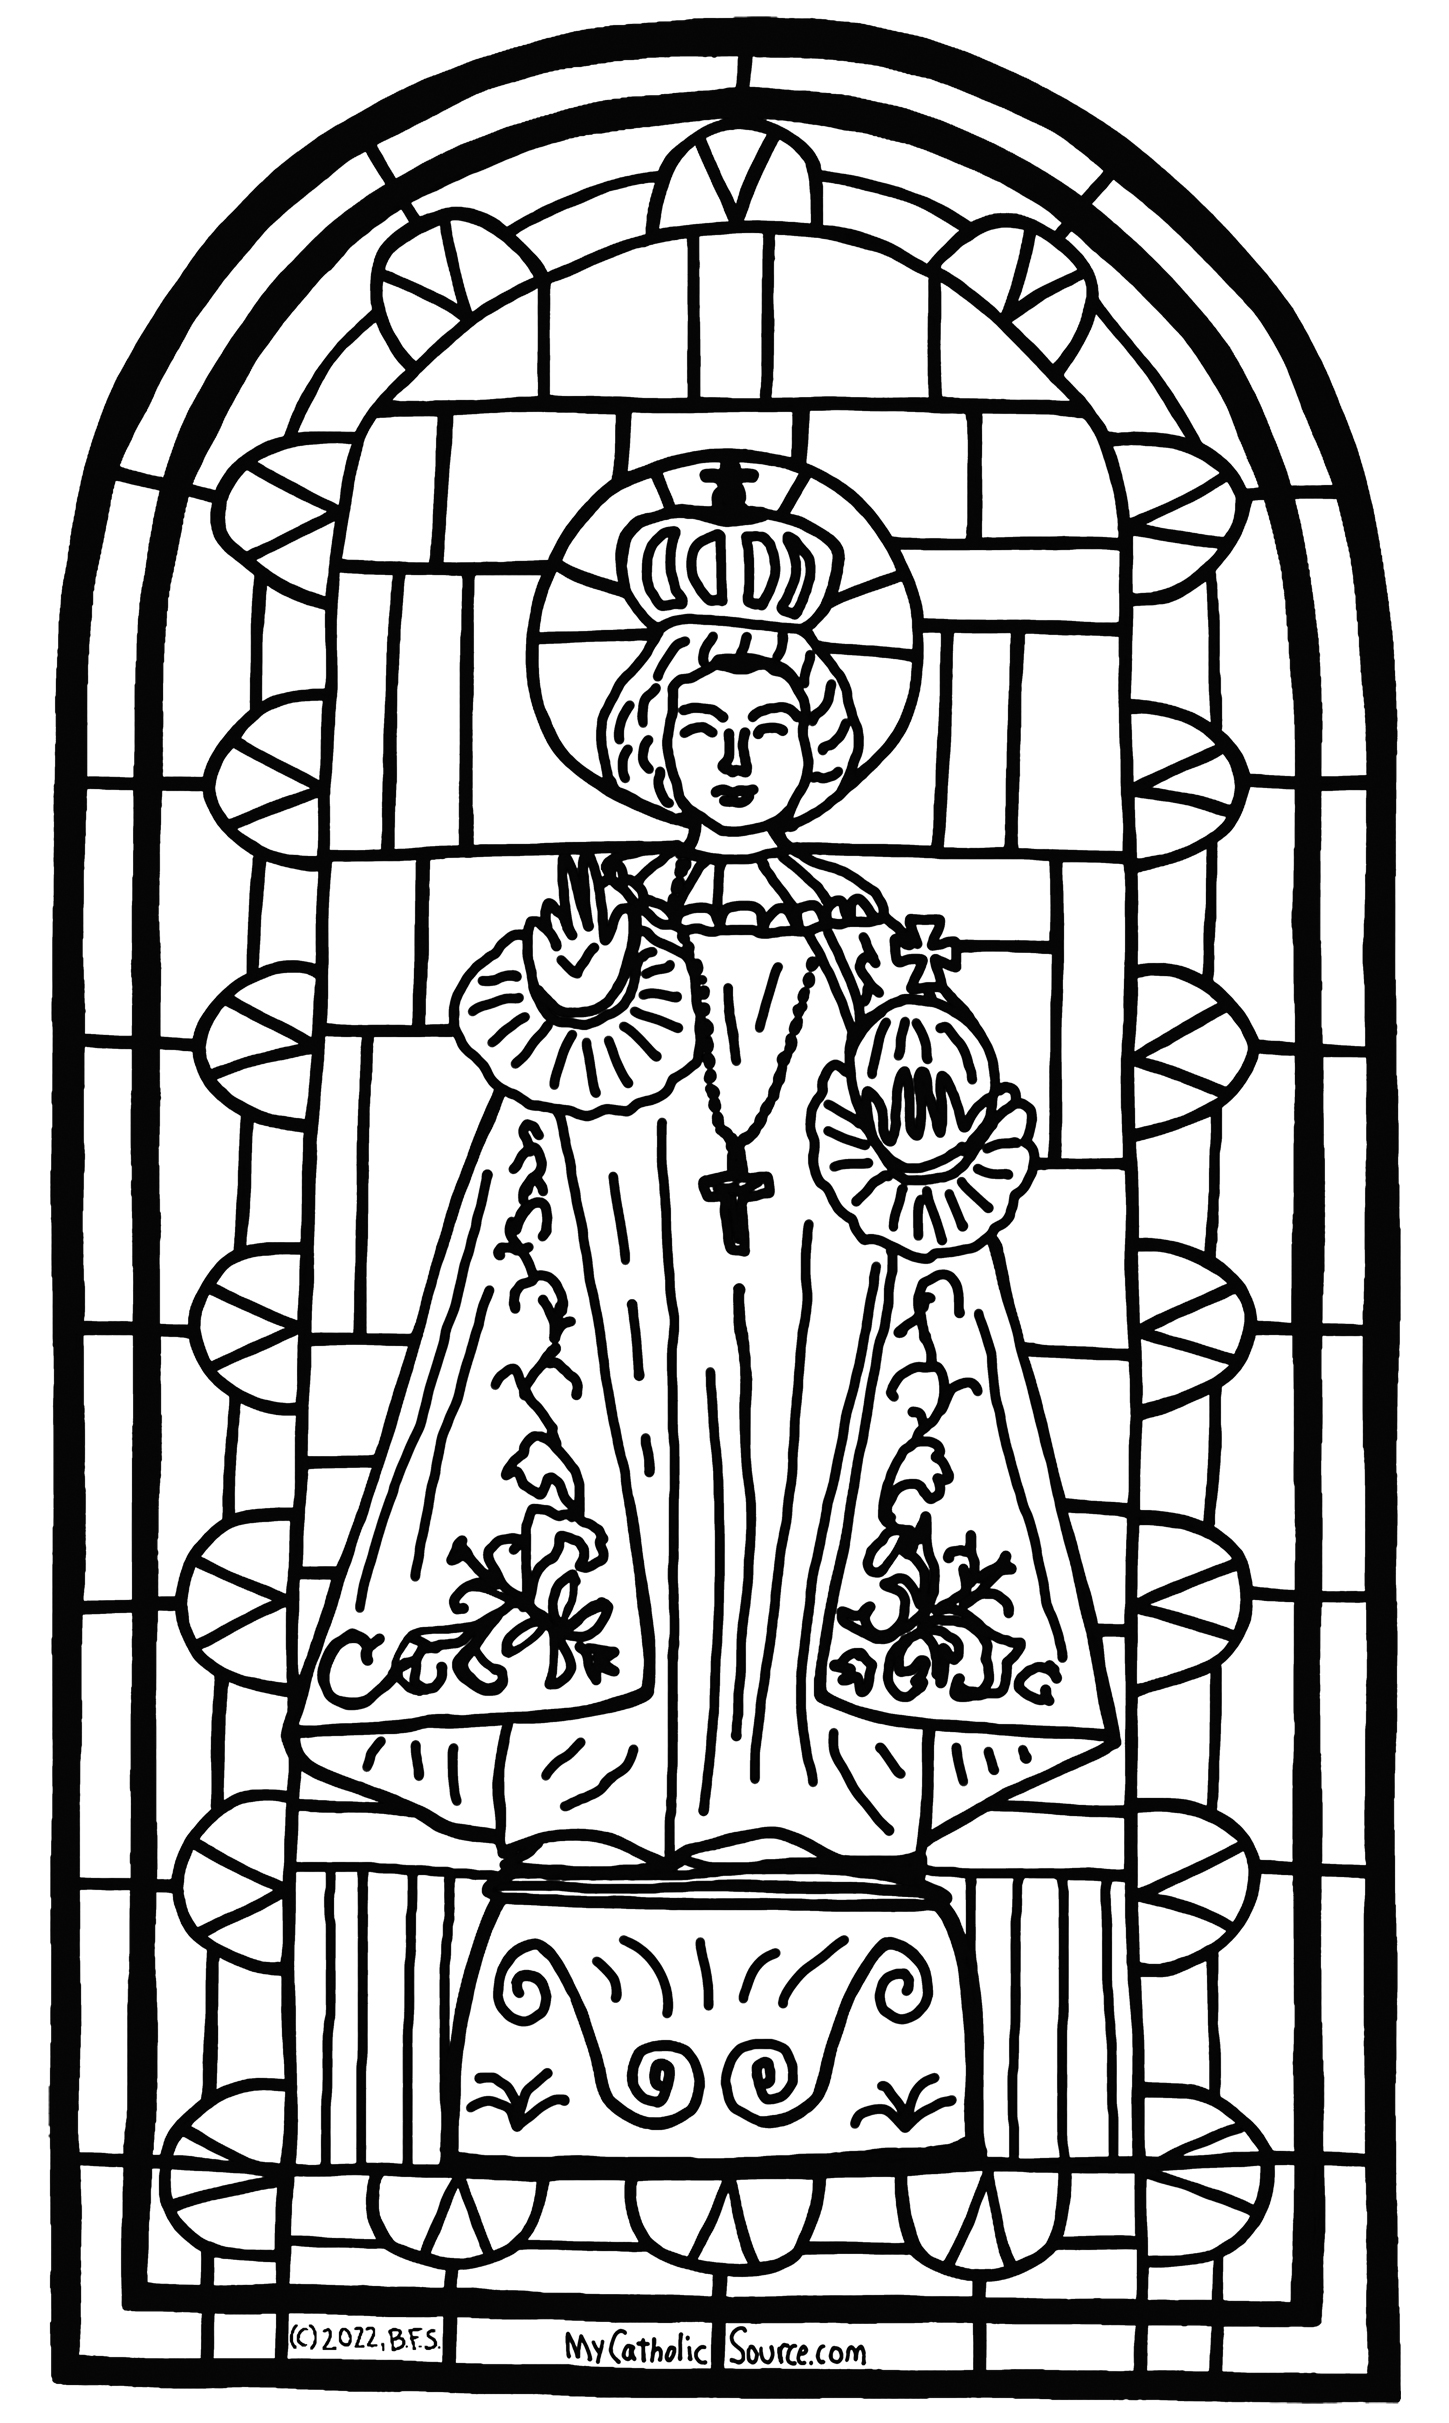 Coloring Book Image (Hand Drawn/Traced Stained Glass)